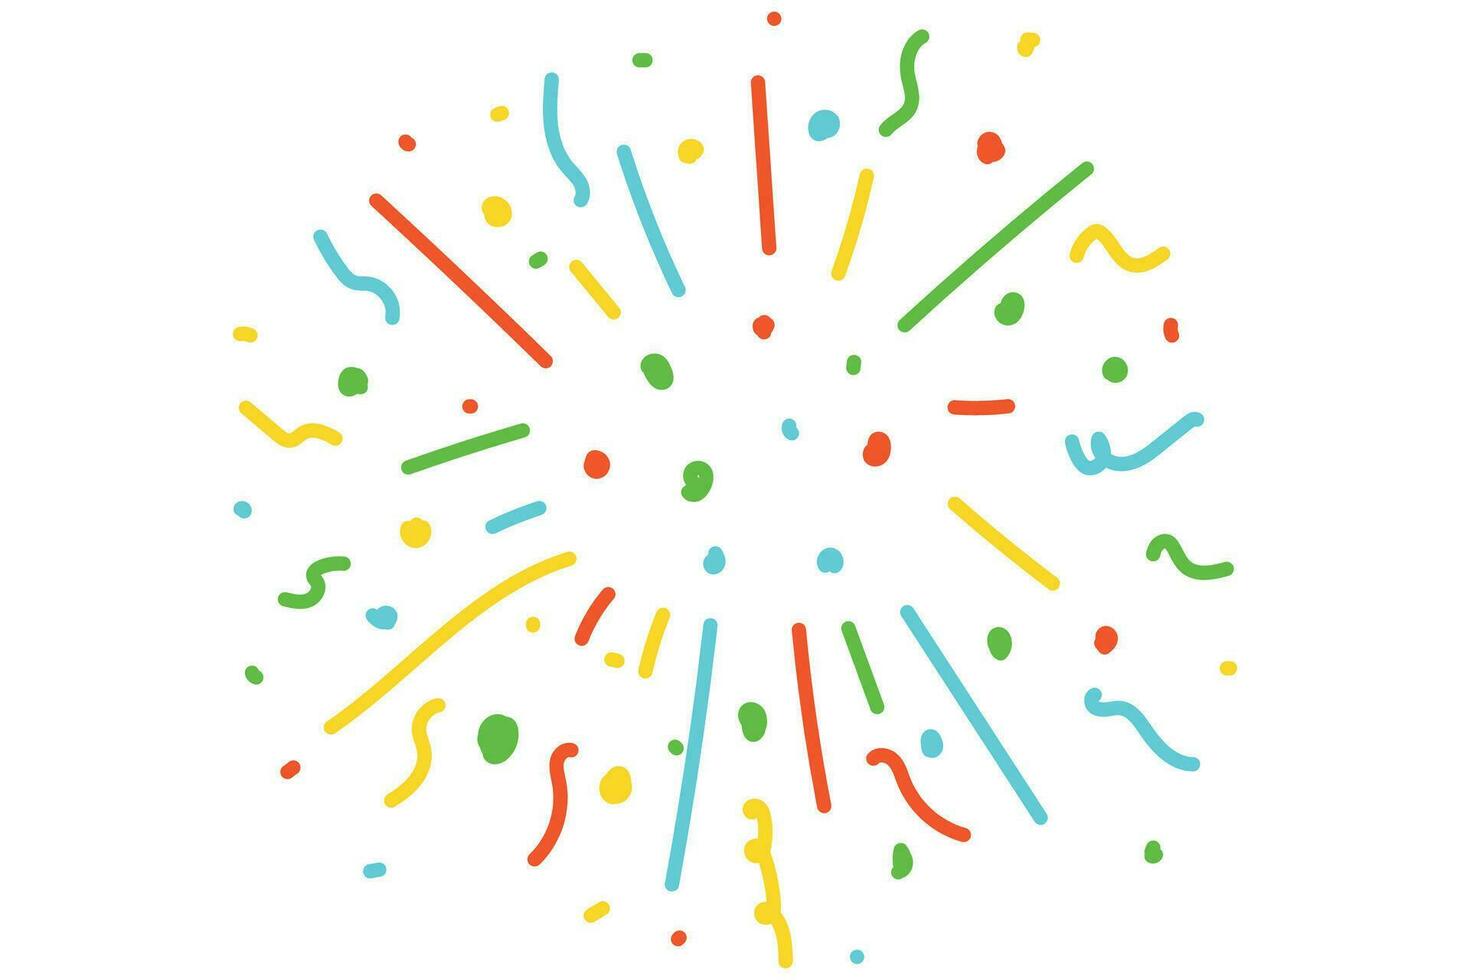 Exploding party popper. Cracker with colorful confetti. Festive firecracker icon. Popping ribbon confetti. Cracker for celebrating christmas birthday. Vector illustration isolated on white background.